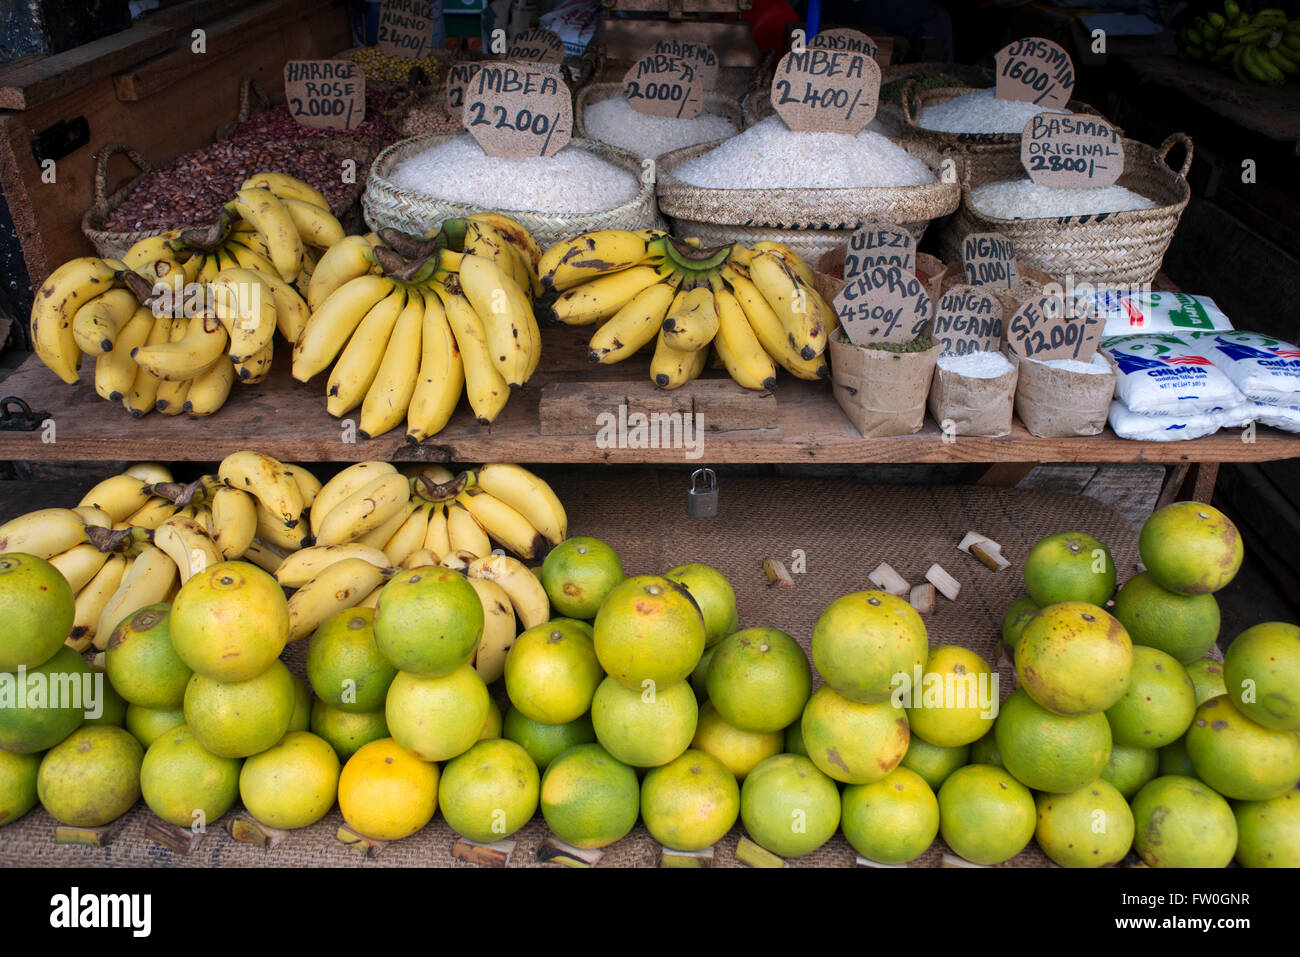 Sale of limes, bananas and different types of rice in the Stone Town market, Zanzibar, Tanzania. Stock Photo